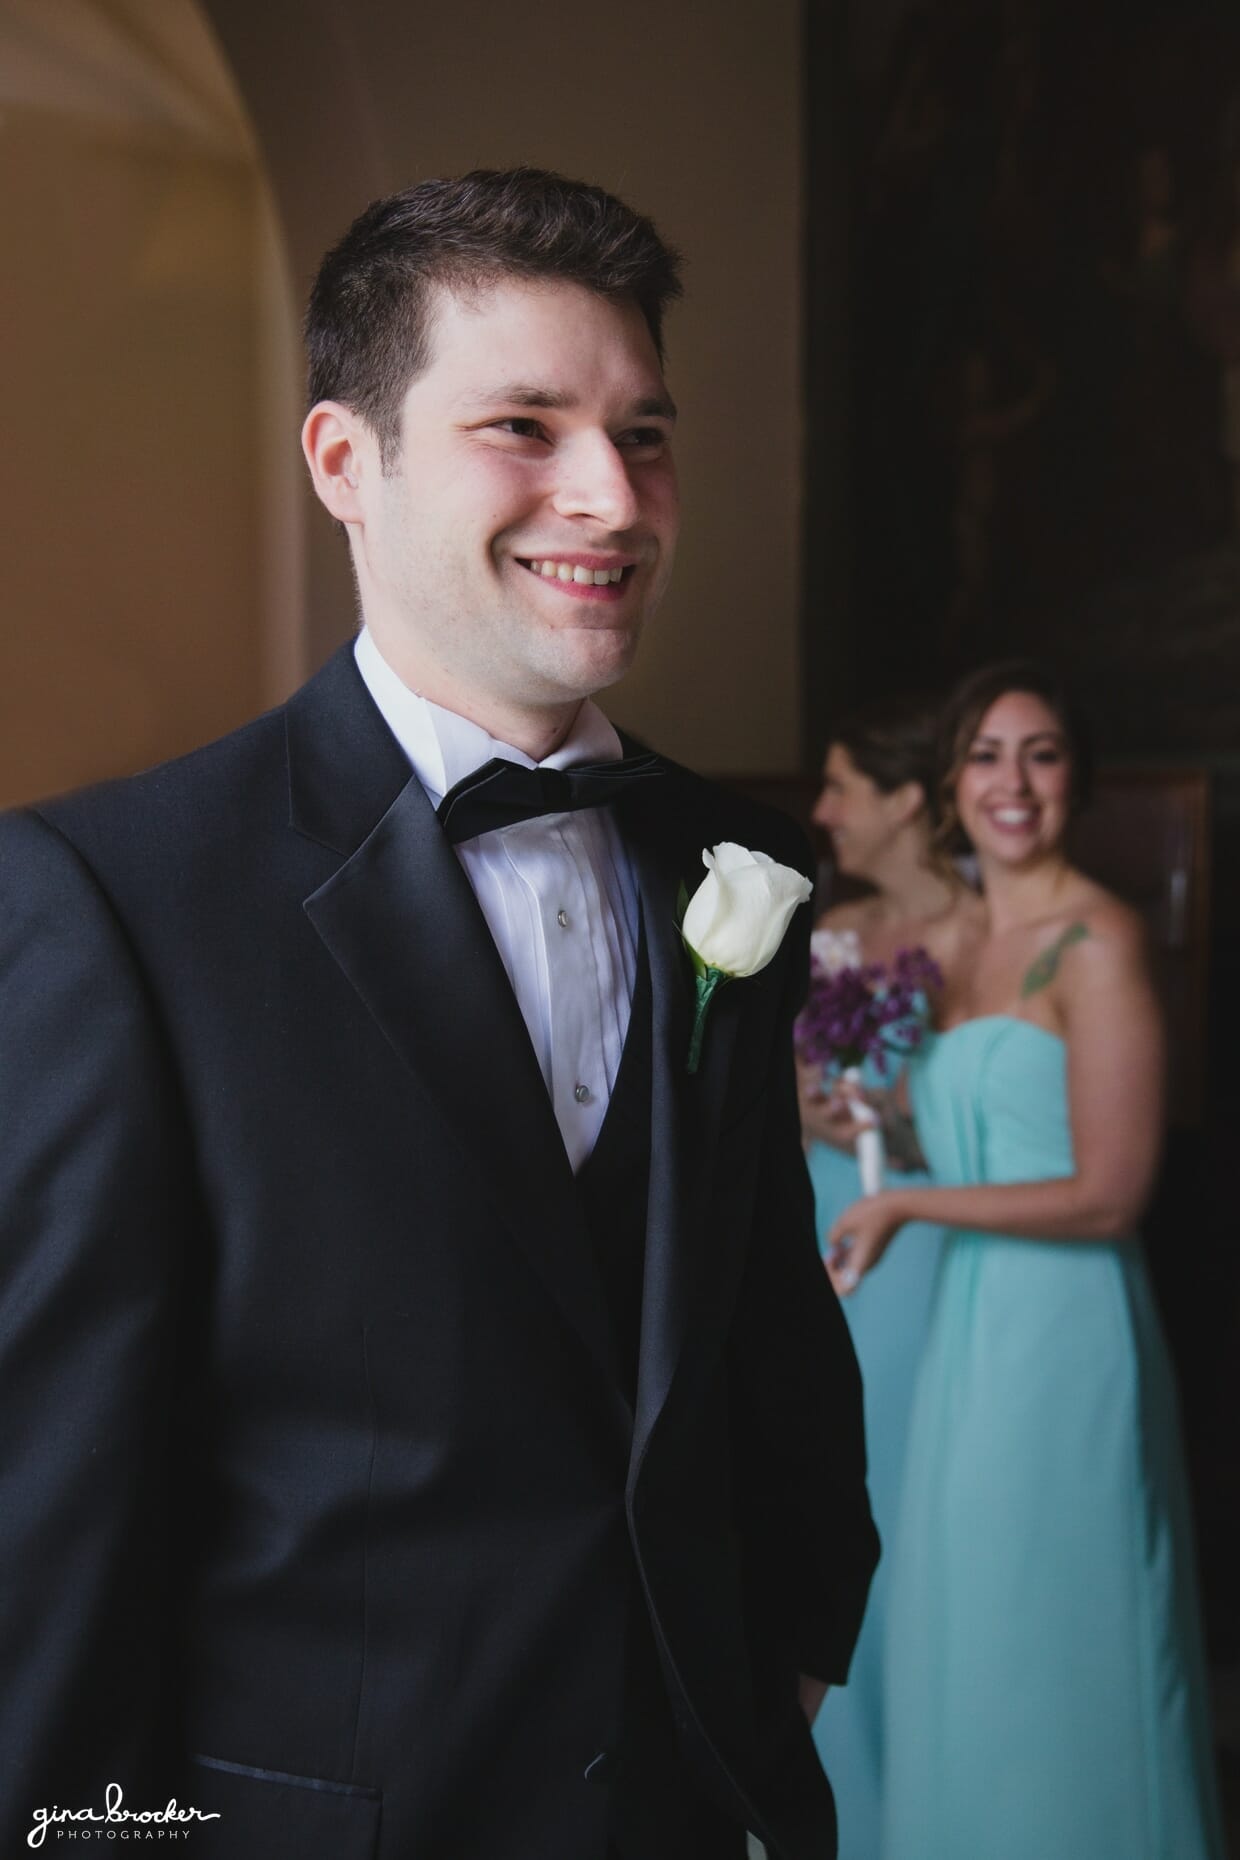 A candid portrait of a groom just before his wedding ceremony at the Sacred Heart of Jesus Church in Cambridge, Massachusetts